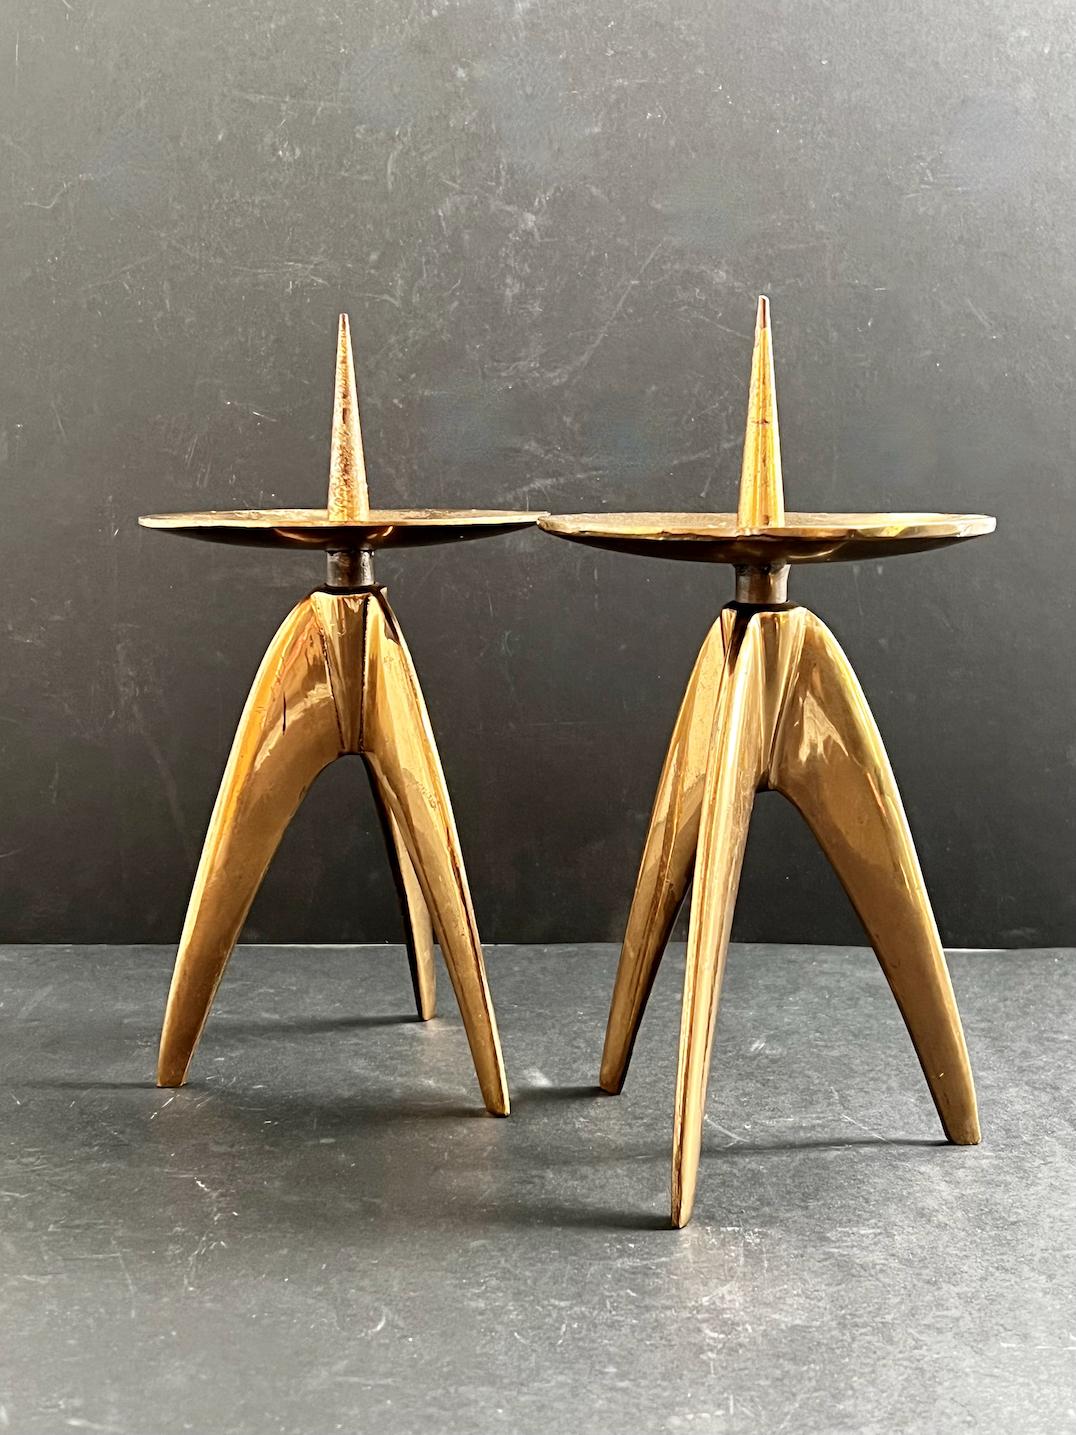 A pair of tripod midcentury candleholders, with mellow gold finish. Found in Germany, mid-20th century. Brass body with steel spikes showing minor rust.

Approximate dimensions:
H: 27 20cm (including / excluding spike)
Dia: 14.5cm.